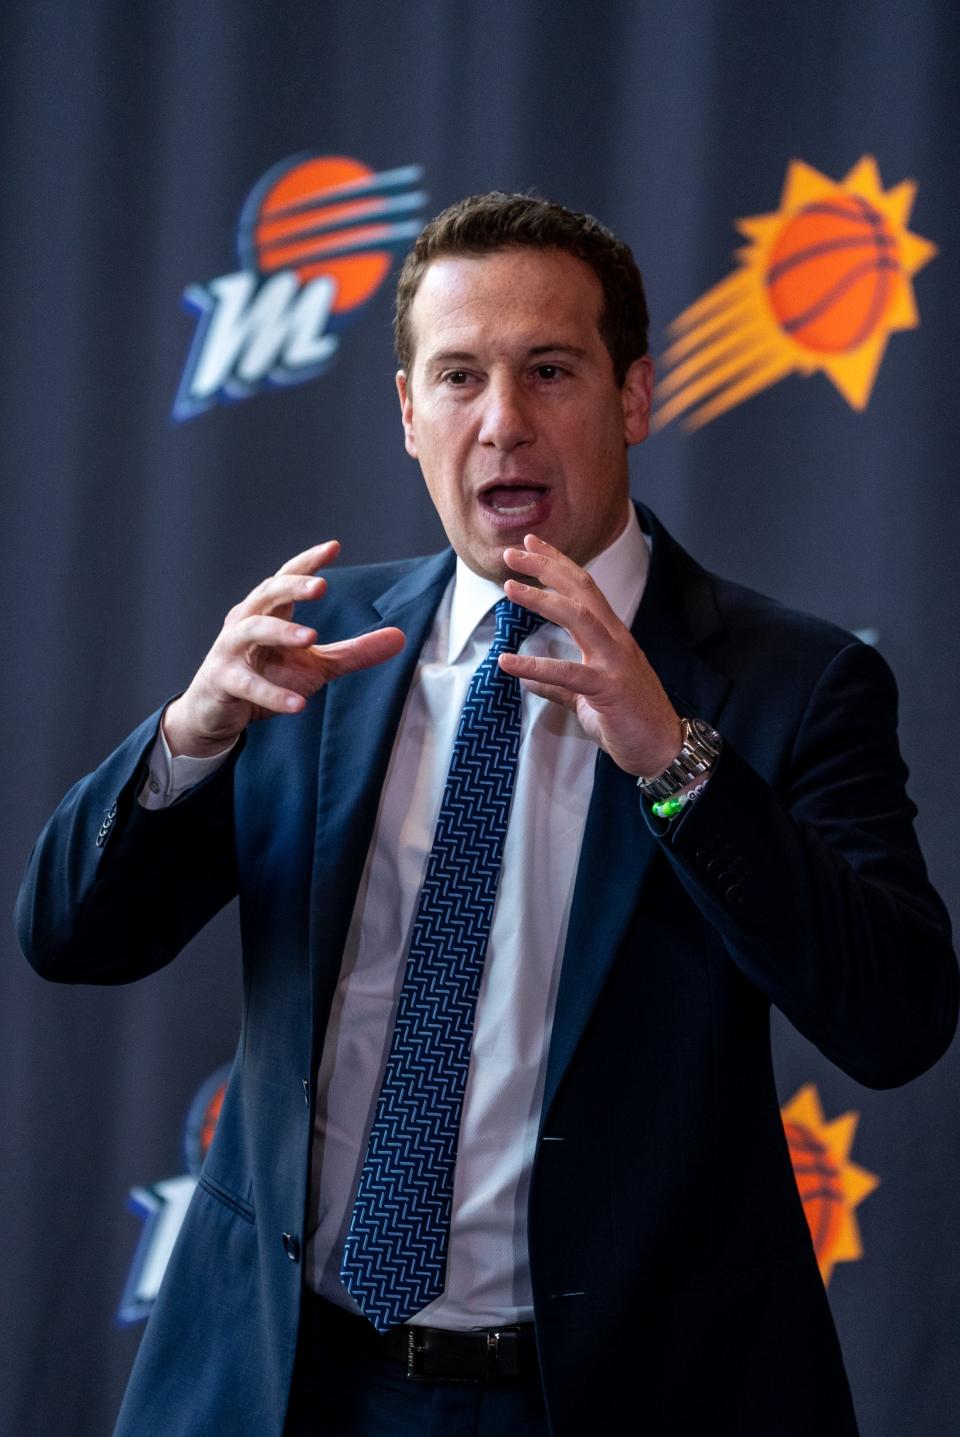 Mat Ishbia attends a news conference introducing him as the new majority owner of the Suns and Mercury at Footprint Center in Phoenix on Feb. 8, 2023.